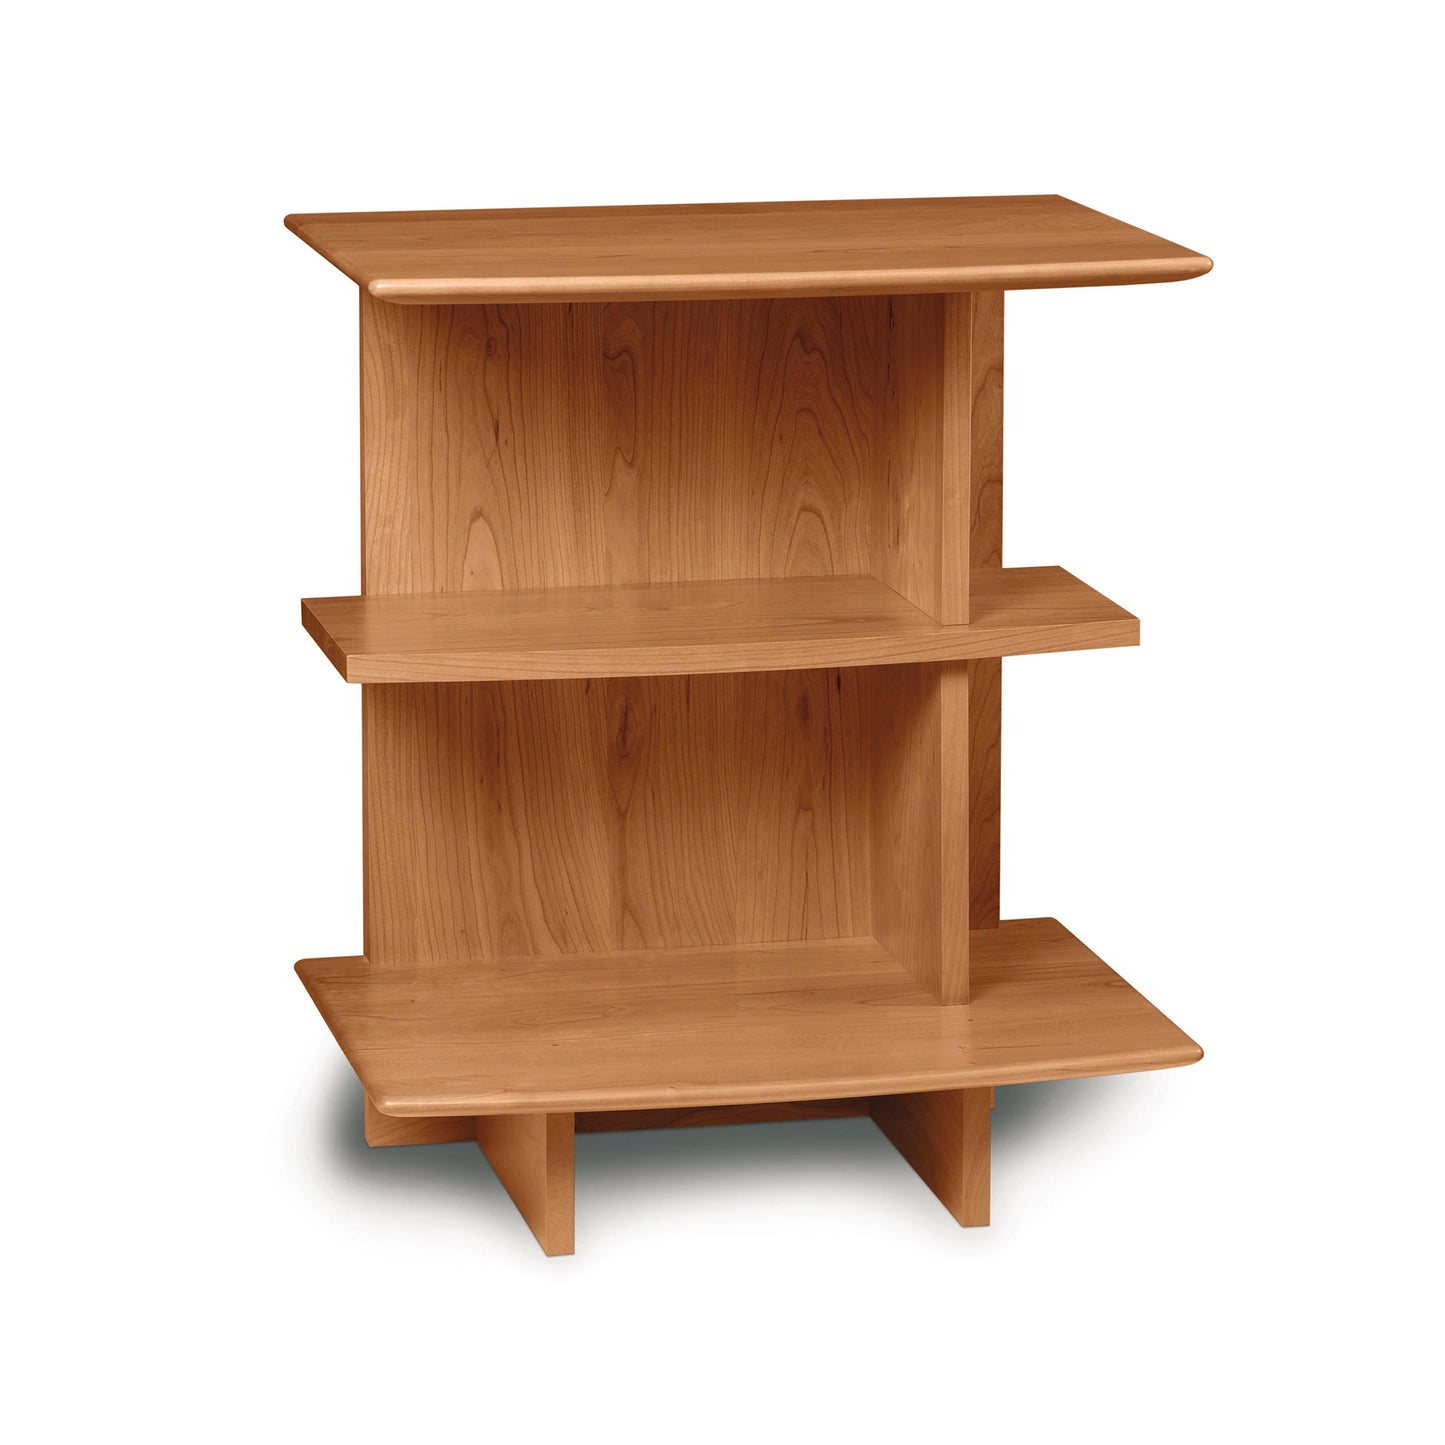 A wooden three-tiered corner shelf from the Copeland Furniture Sarah Open Shelf Nightstand Collection on a white background.